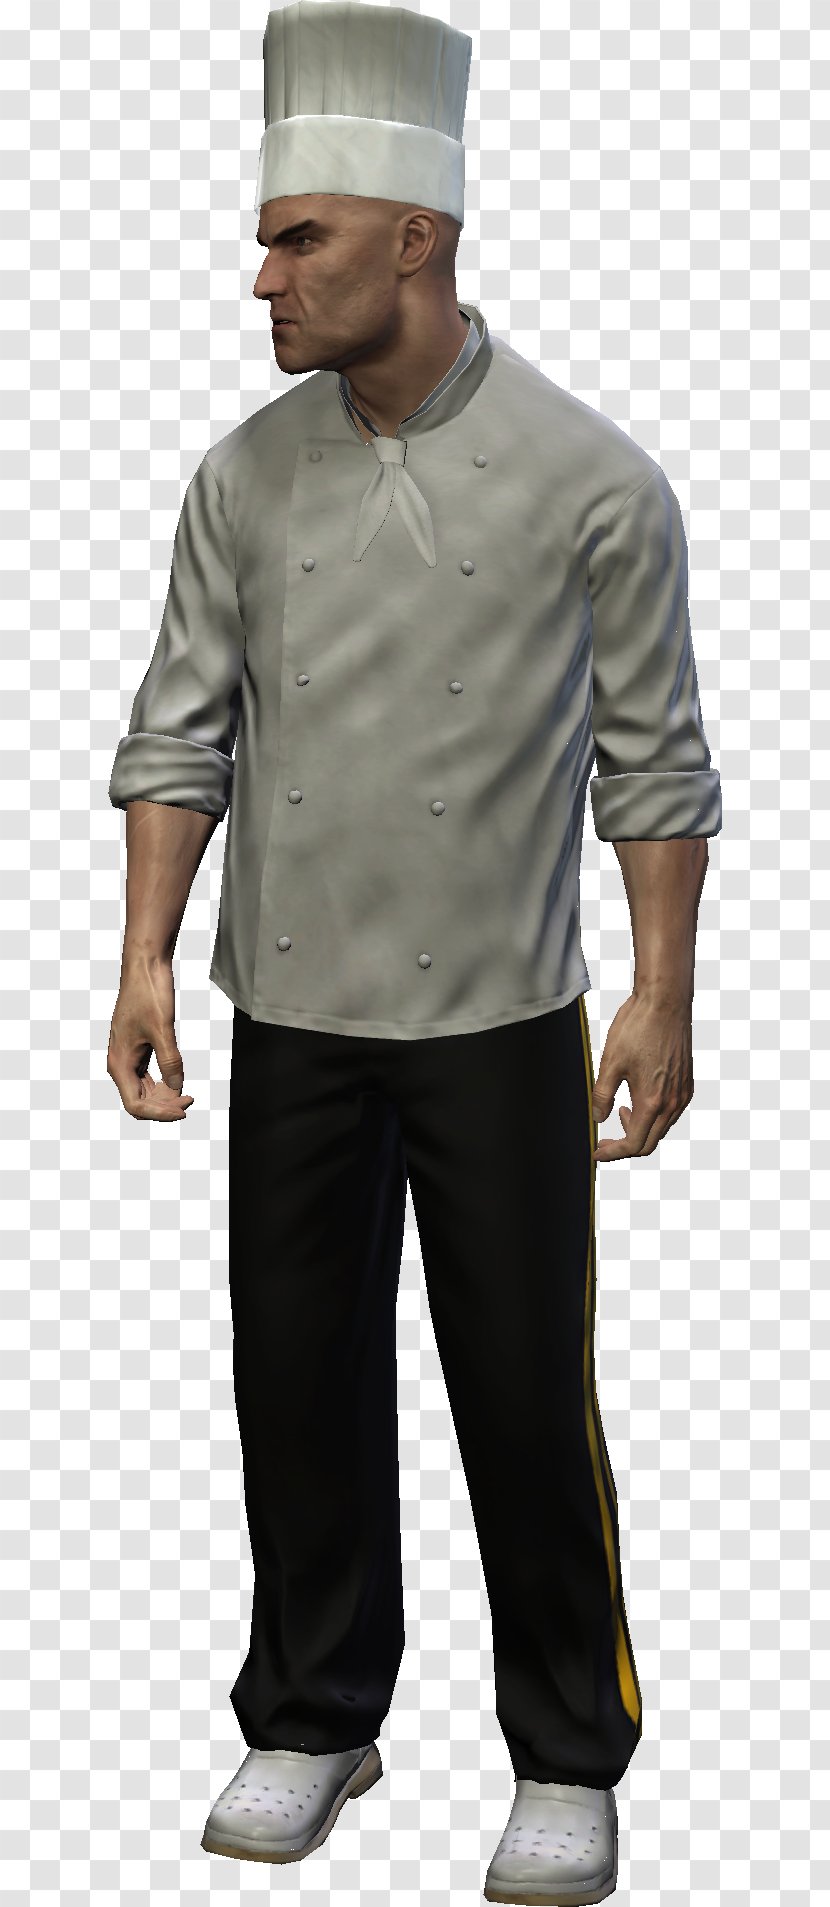 Hitman: Absolution Codename 47 PlayStation 4 Agent - Chef Transparent PNG